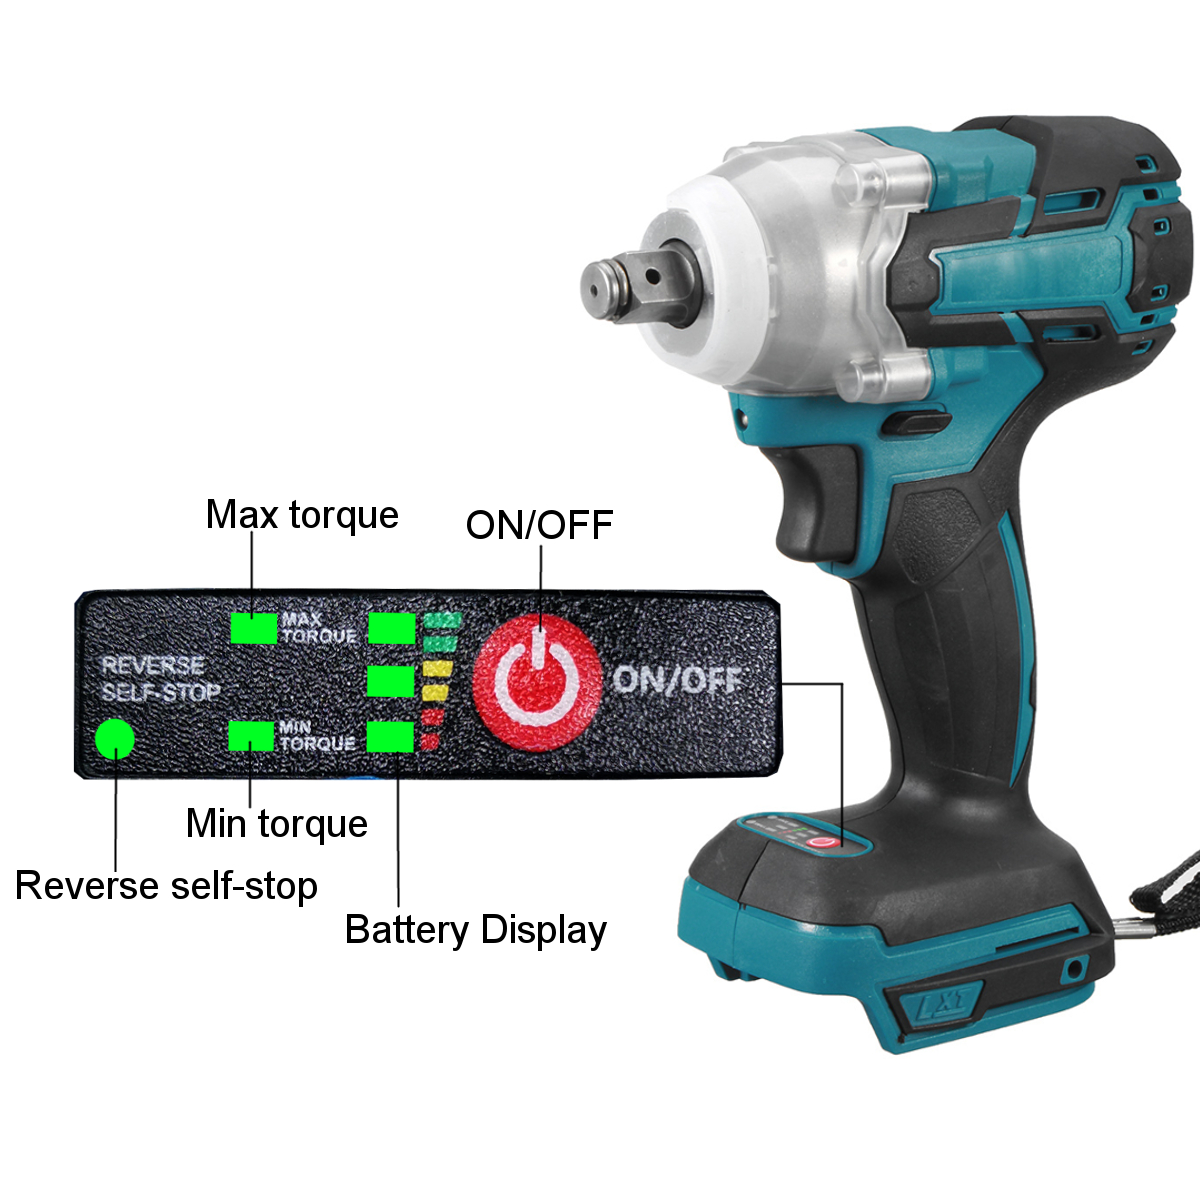 588Nm-Cordless-Brushless-Wrench12-Impact-Wrench-Driver-Replacement-for-Makita-18V-Battery-1856002-13